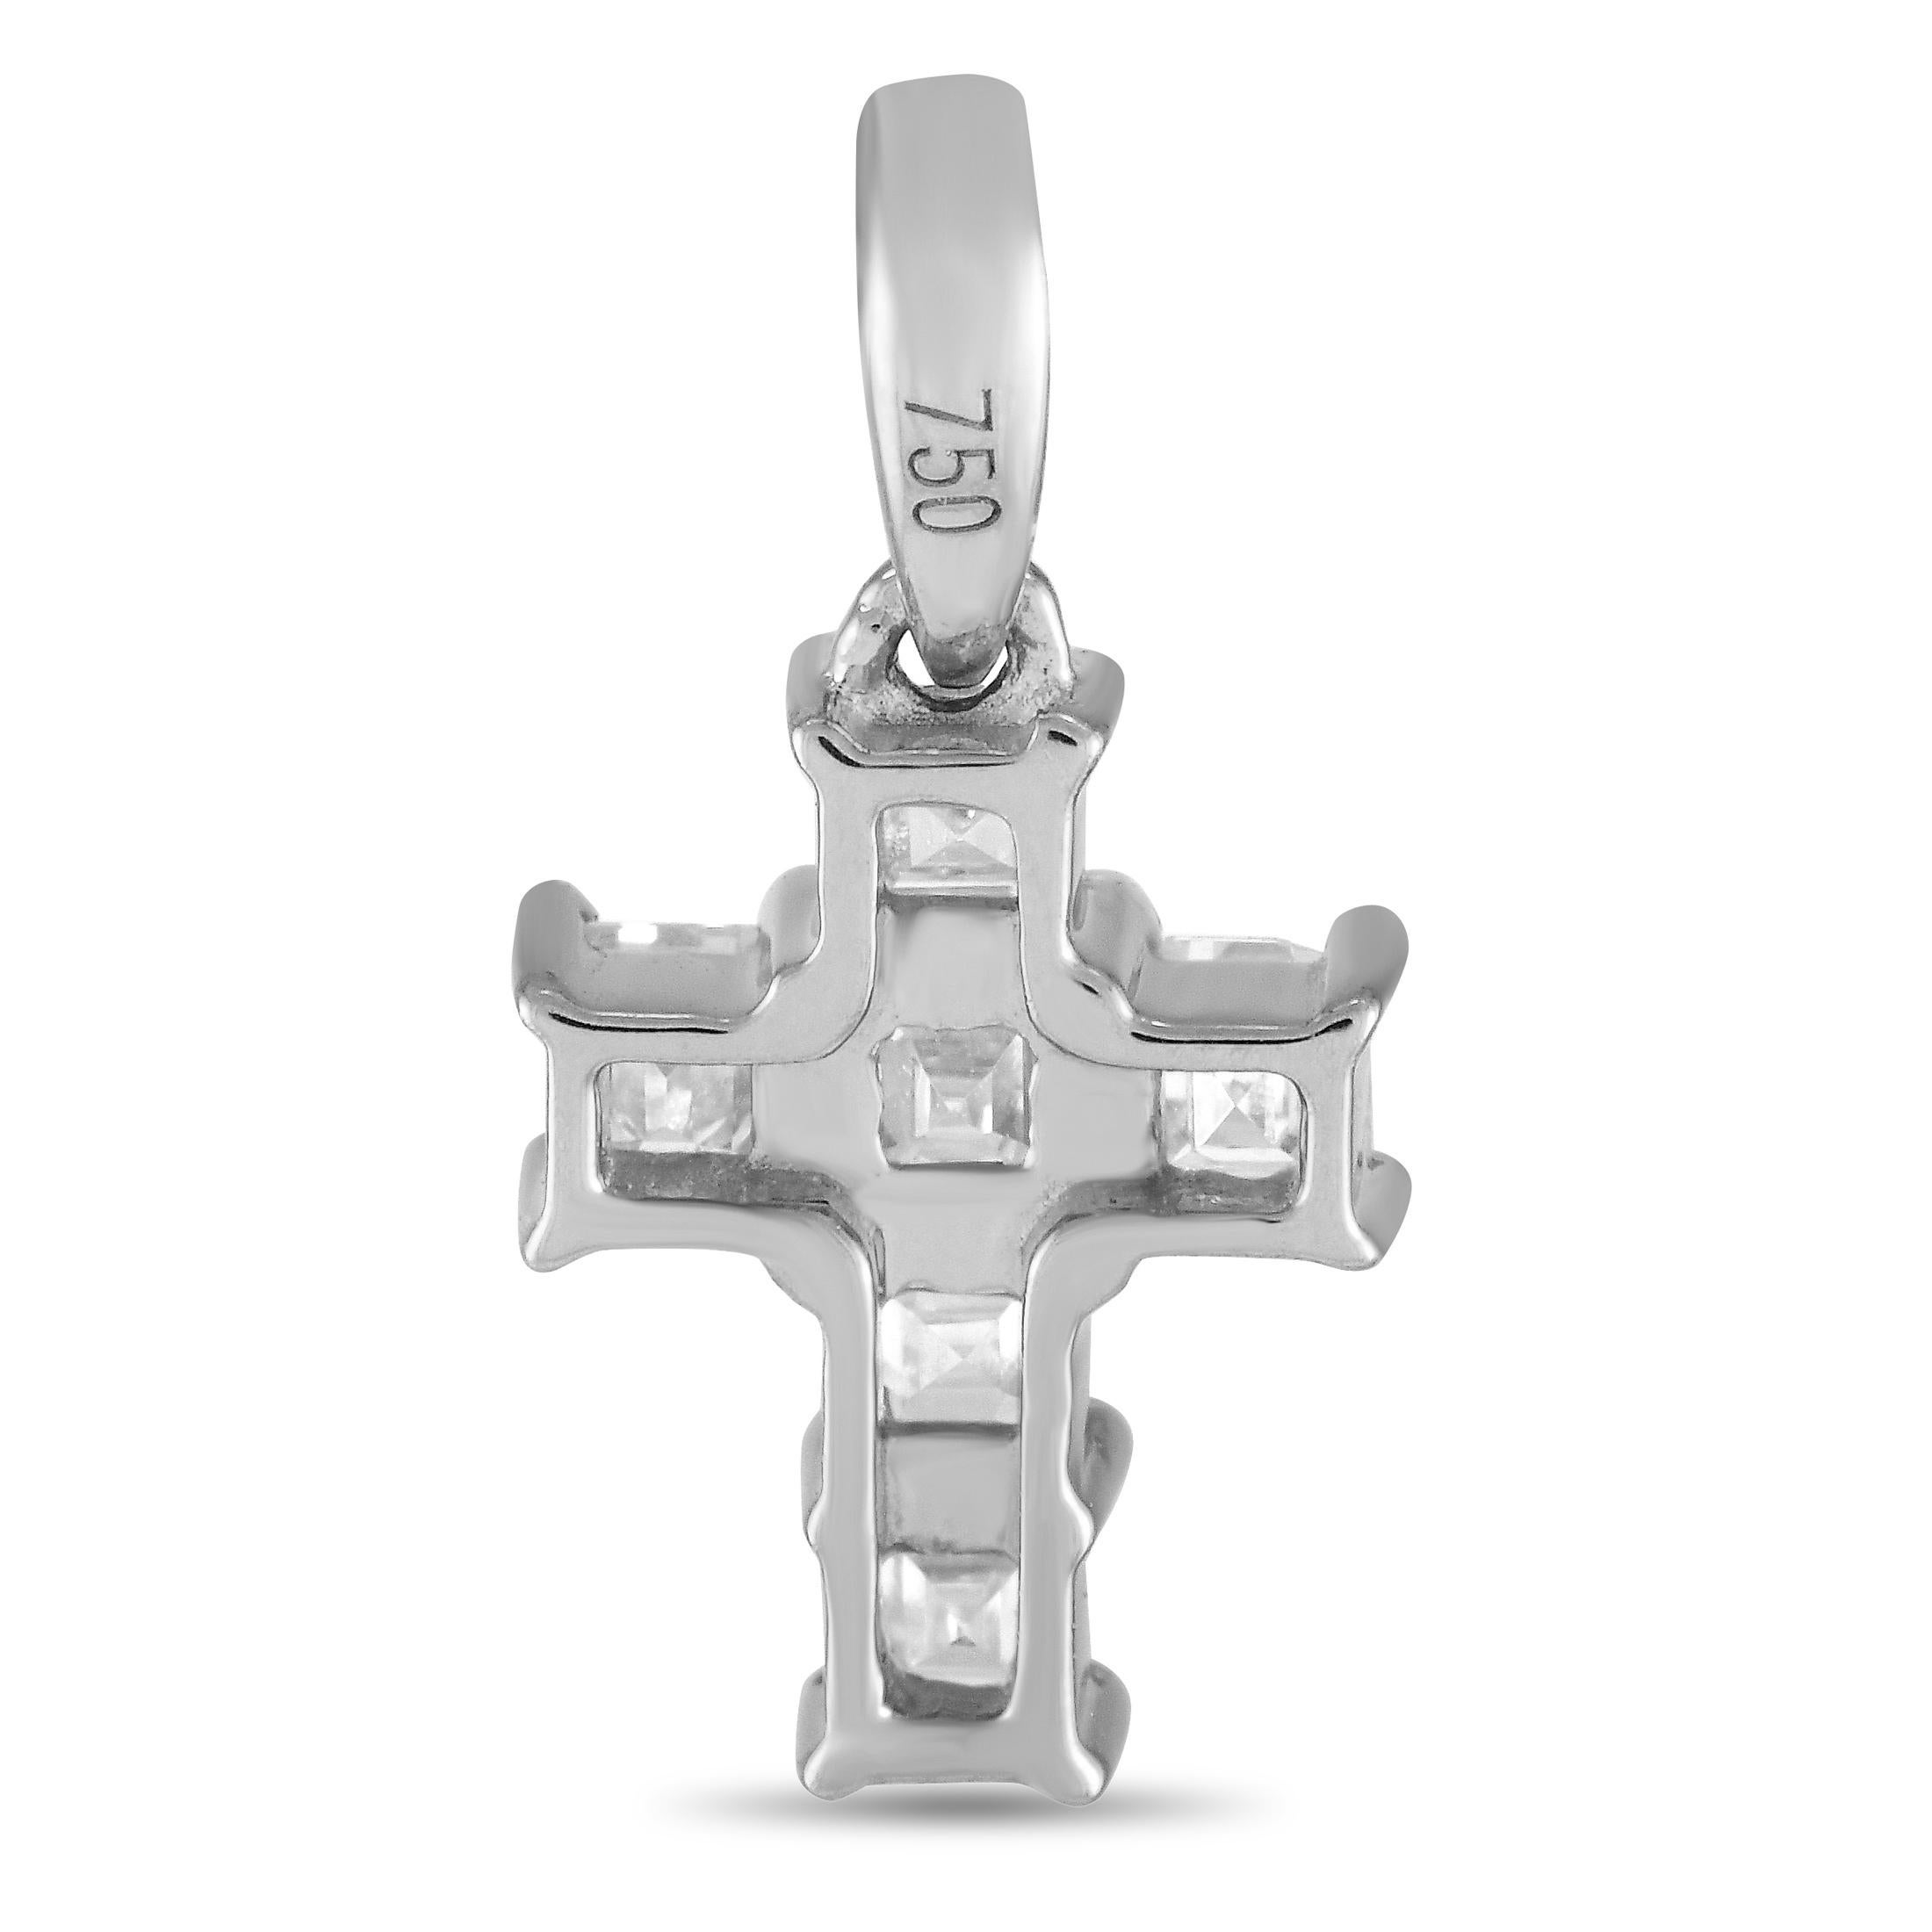 Sparkling square-cut Diamonds totaling 0.28 carats make this cross shaped pendant incredibly captivating. Crafted from 18K White Gold, it measures 0.50 long by 0.25 wide.This jewelry piece is offered in brand new condition and includes a gift box.